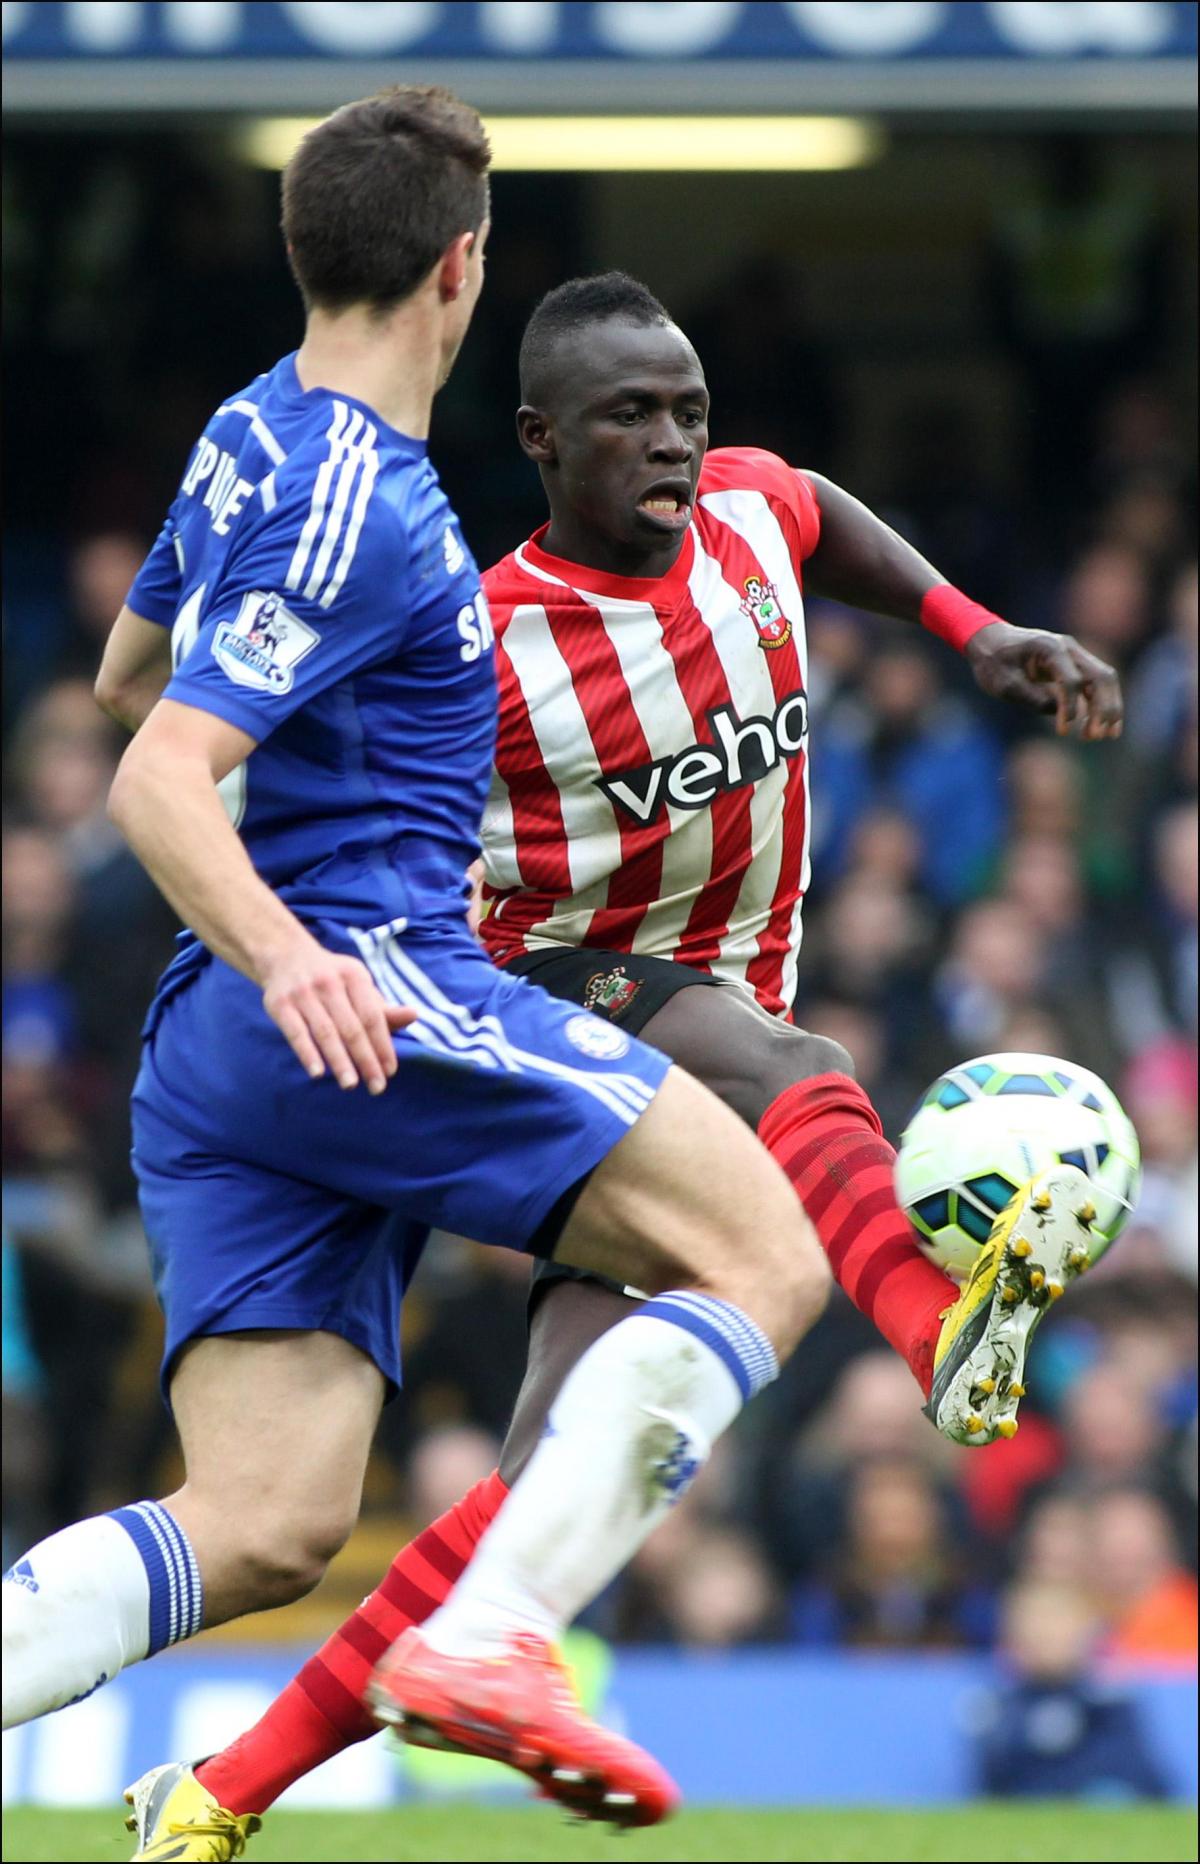 Chelsea v Saints. The unauthorised downloading, editing, copying, or distribution of this image is strictly prohibited.